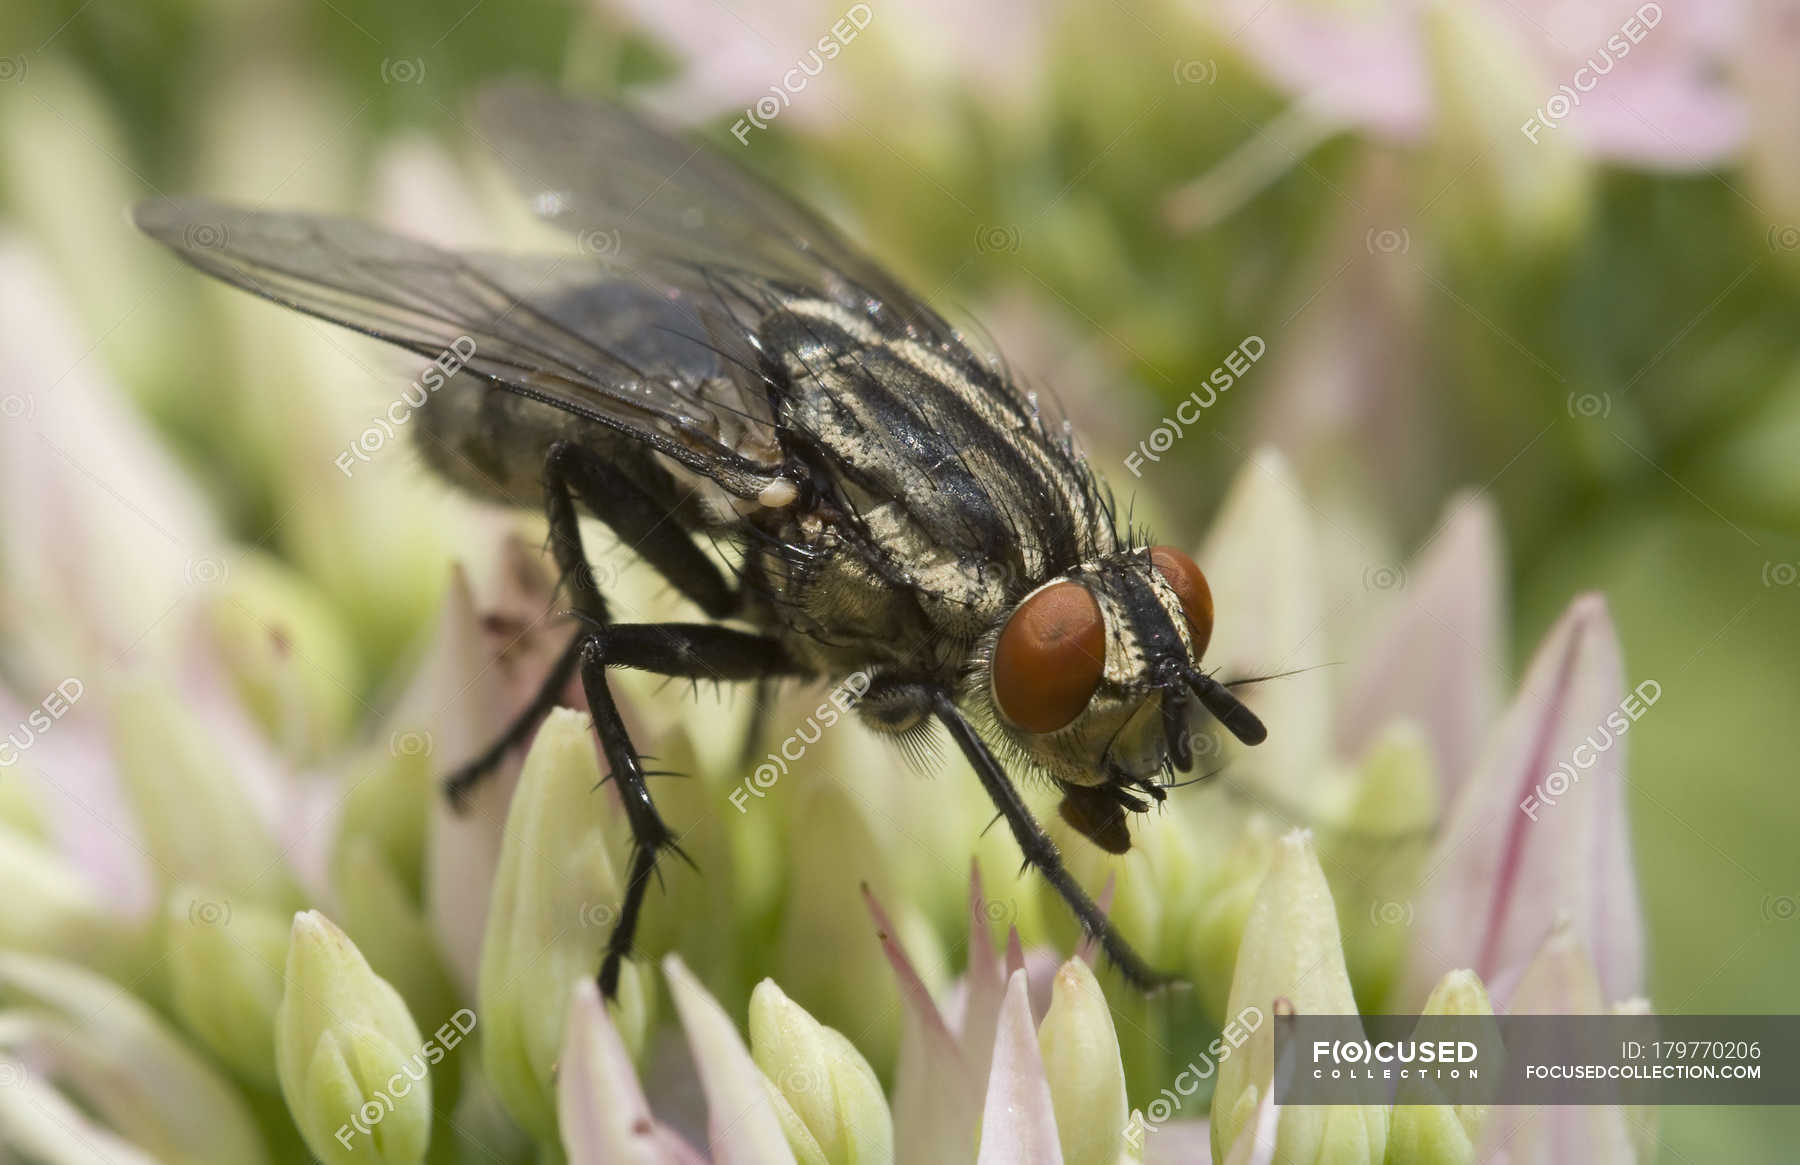 House fly perching on flower — Stock Photo | #179770206